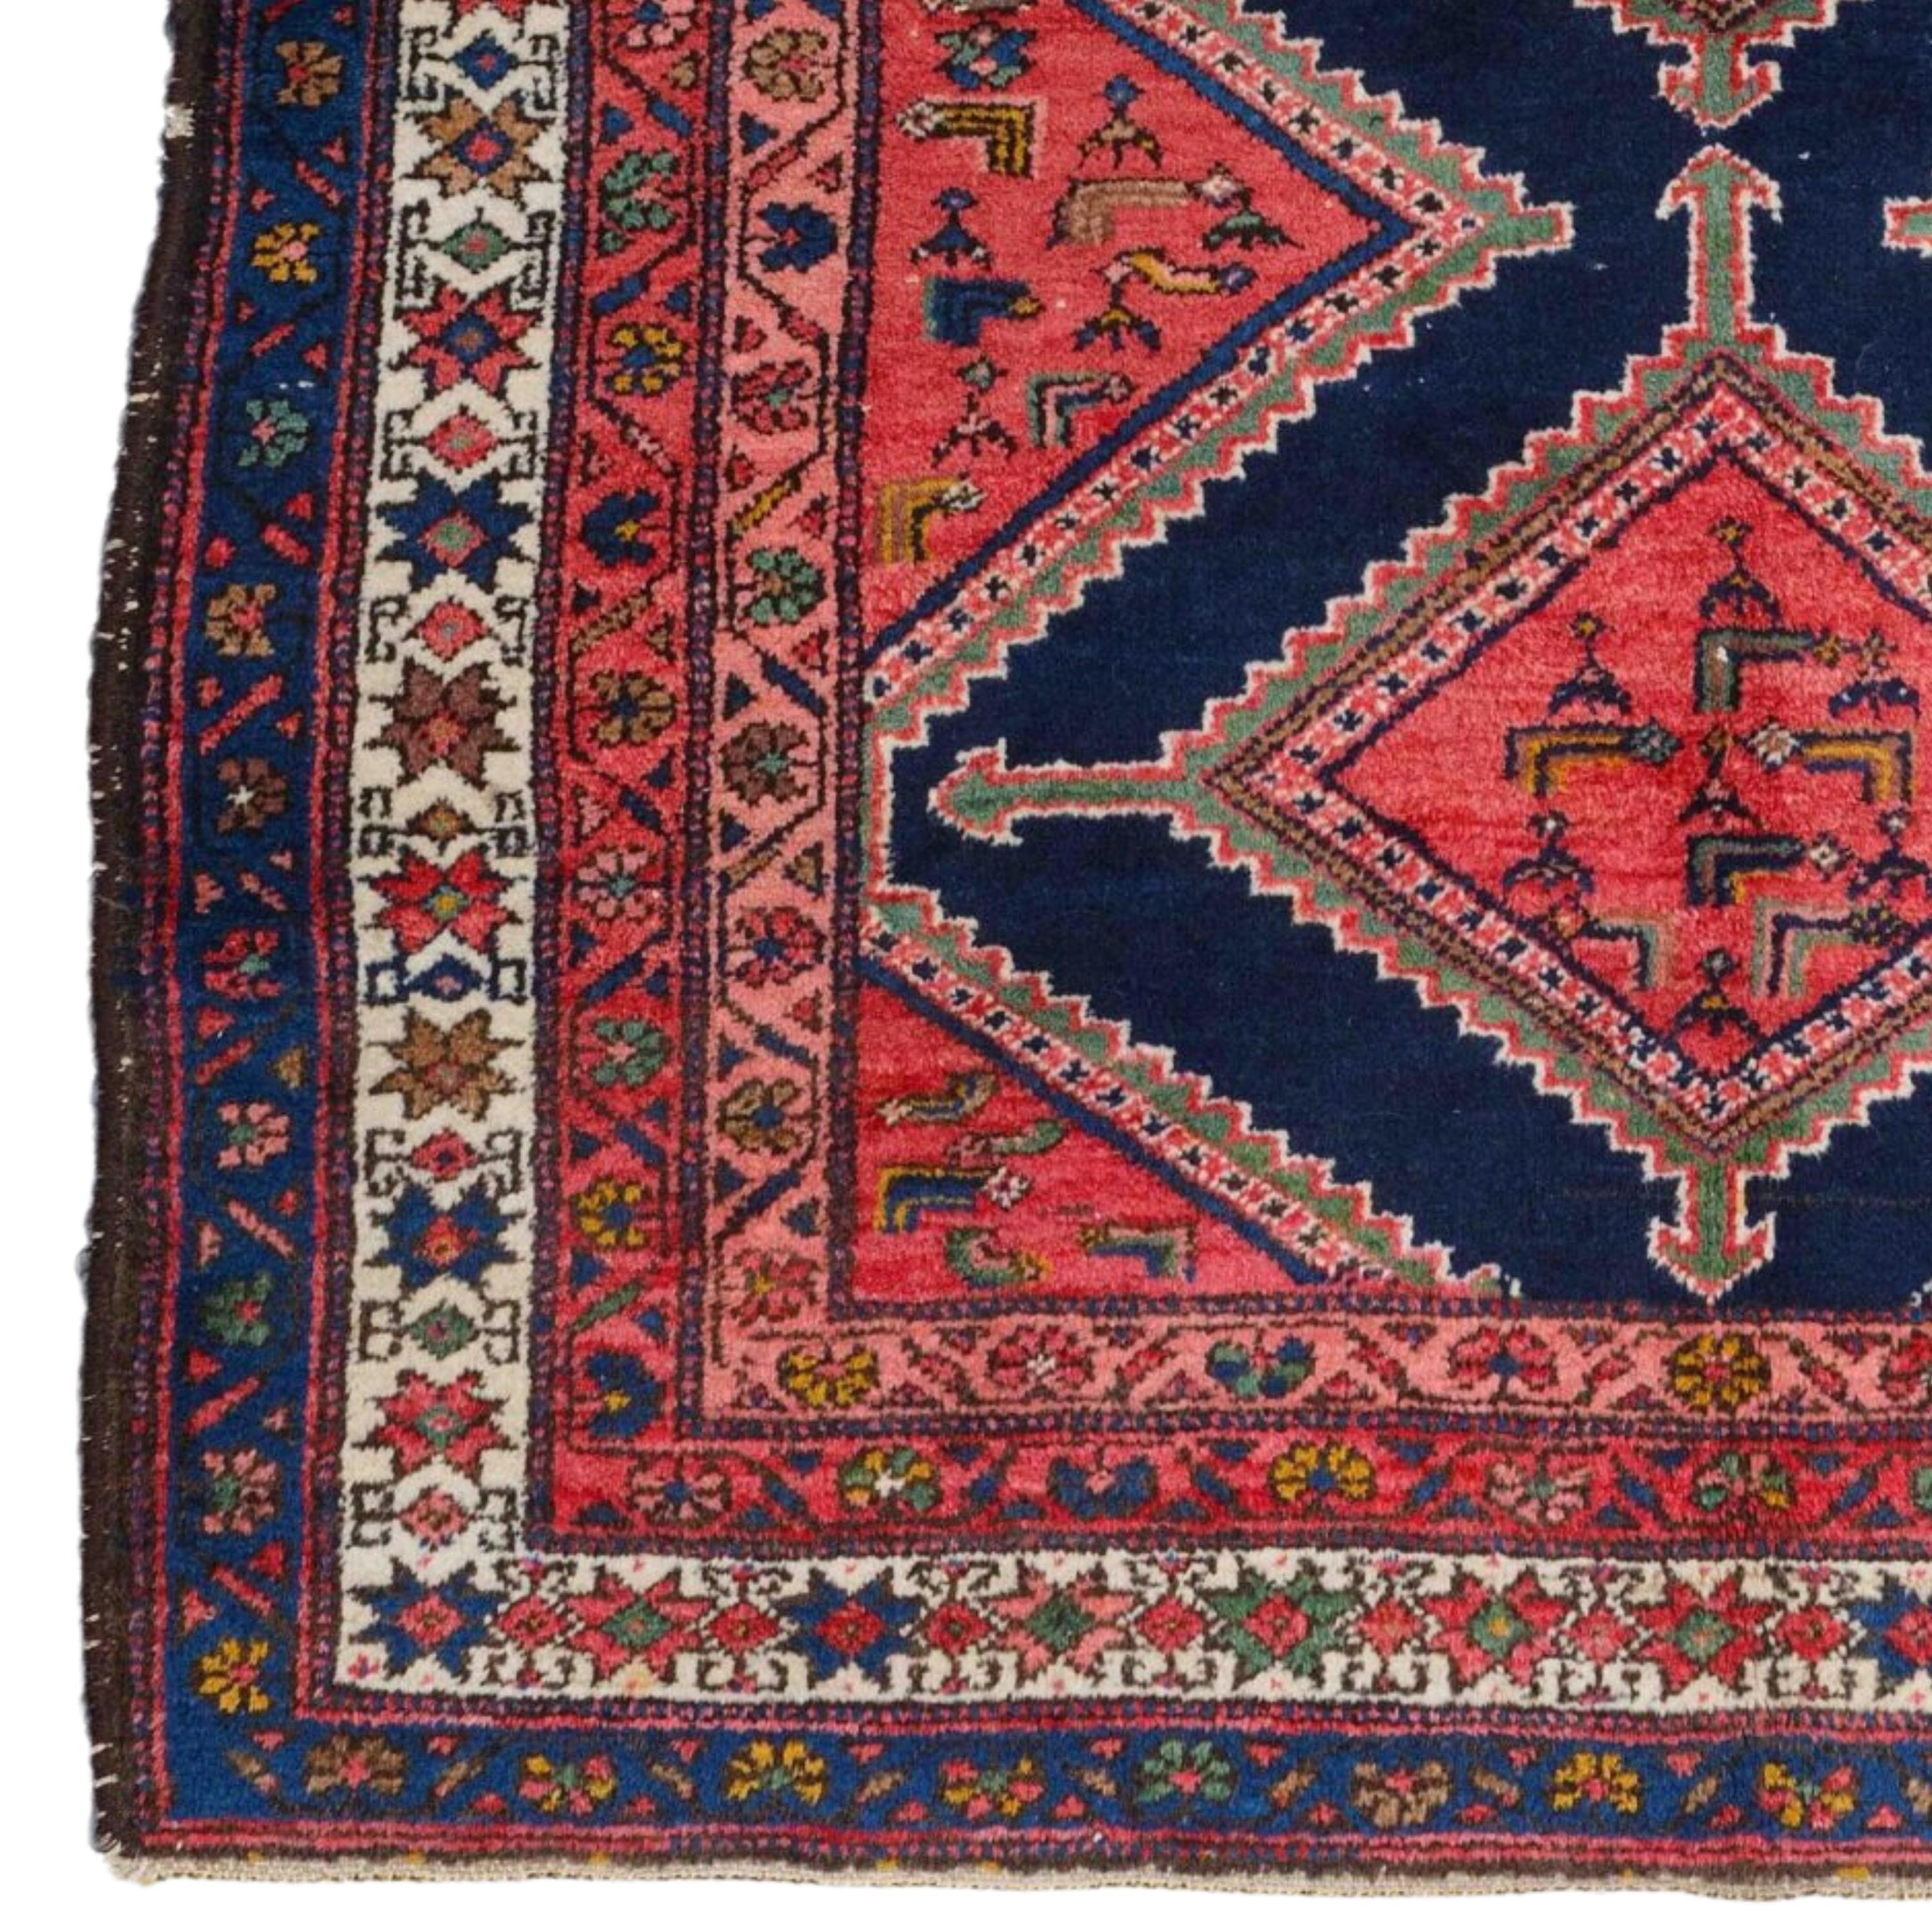 Antique Malayer Rug 136x210 cm (4,46x6,88 ft) 20th Century Malayer Rug in Good Condition

Malayer is a city located in the west of the Middle East, known for its rich historical significance and ancient rug-making traditions. The city, which has a